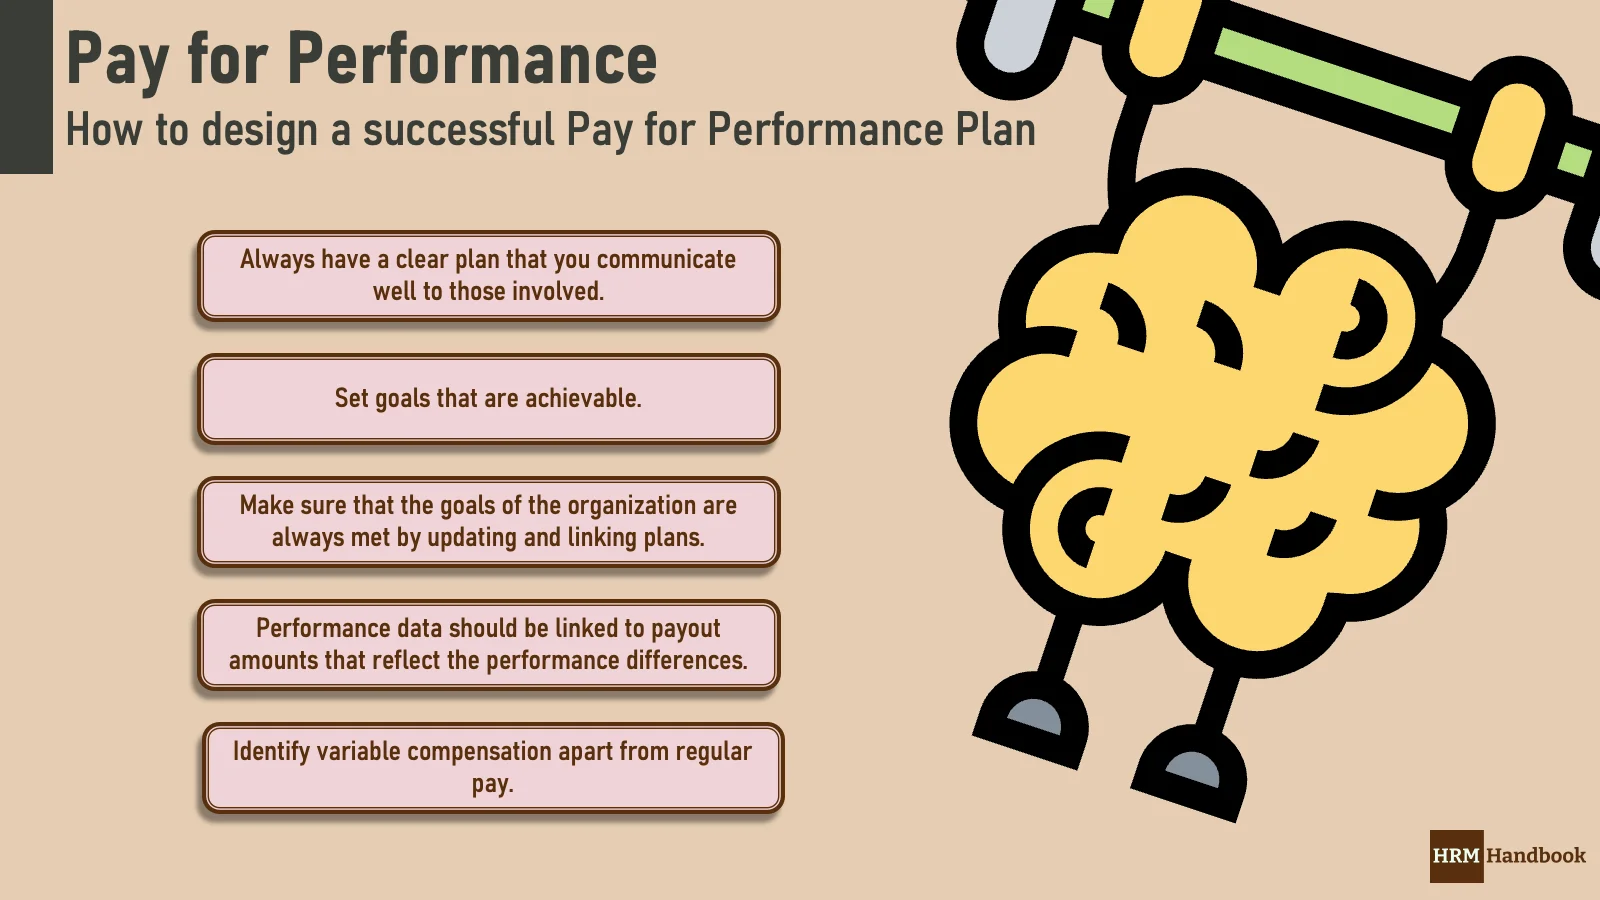 Designing Pay for Performance Plan